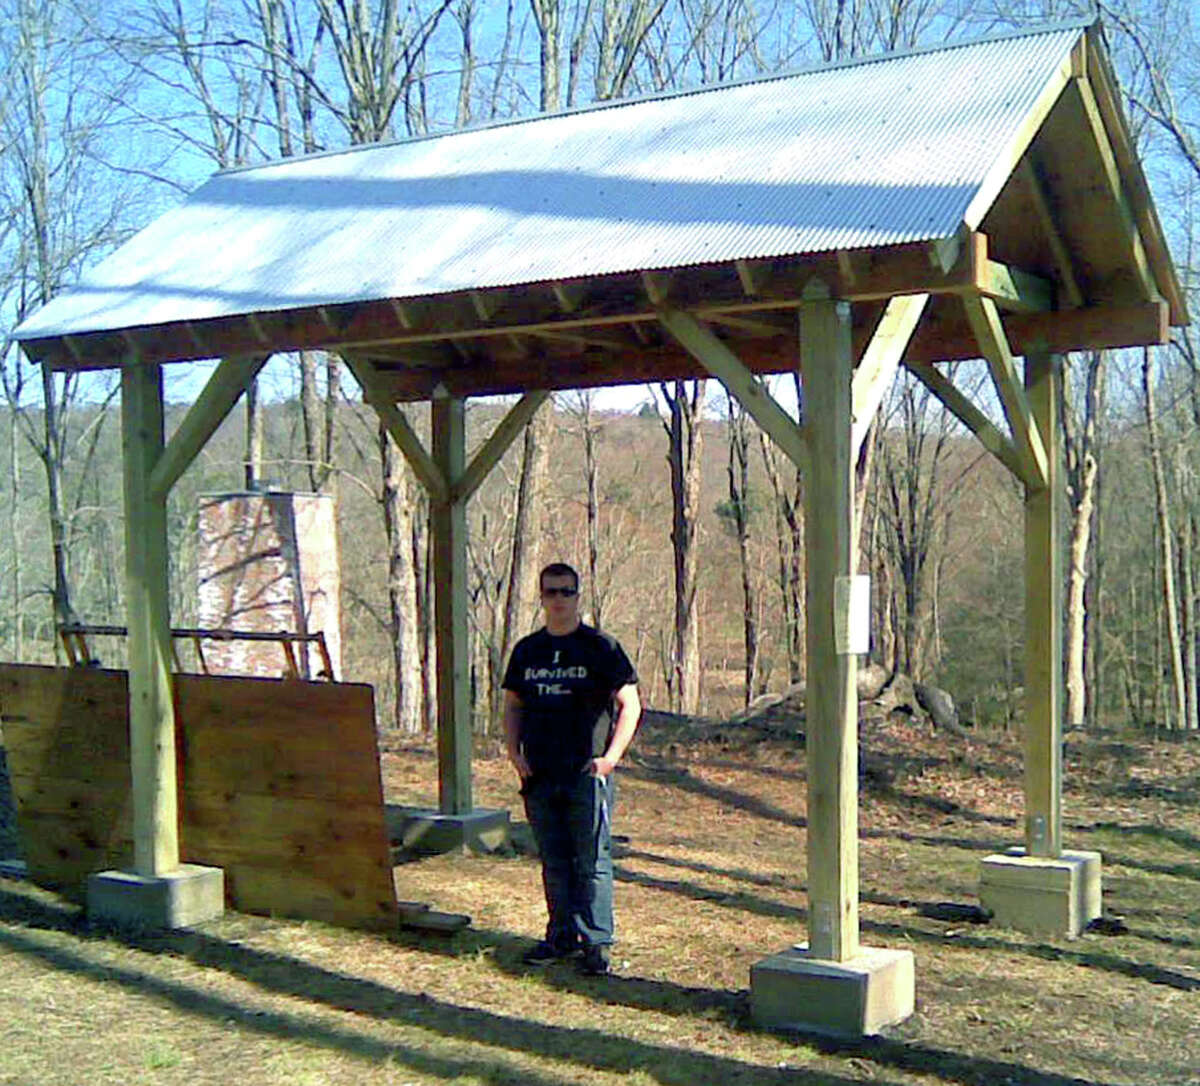 Scott Irwin of Roxbury stands proudly with the structure he built as his Eagle Scout project at the Mine Hill Preserve in Roxbury. May 2013 Courtesy of the Irwin family